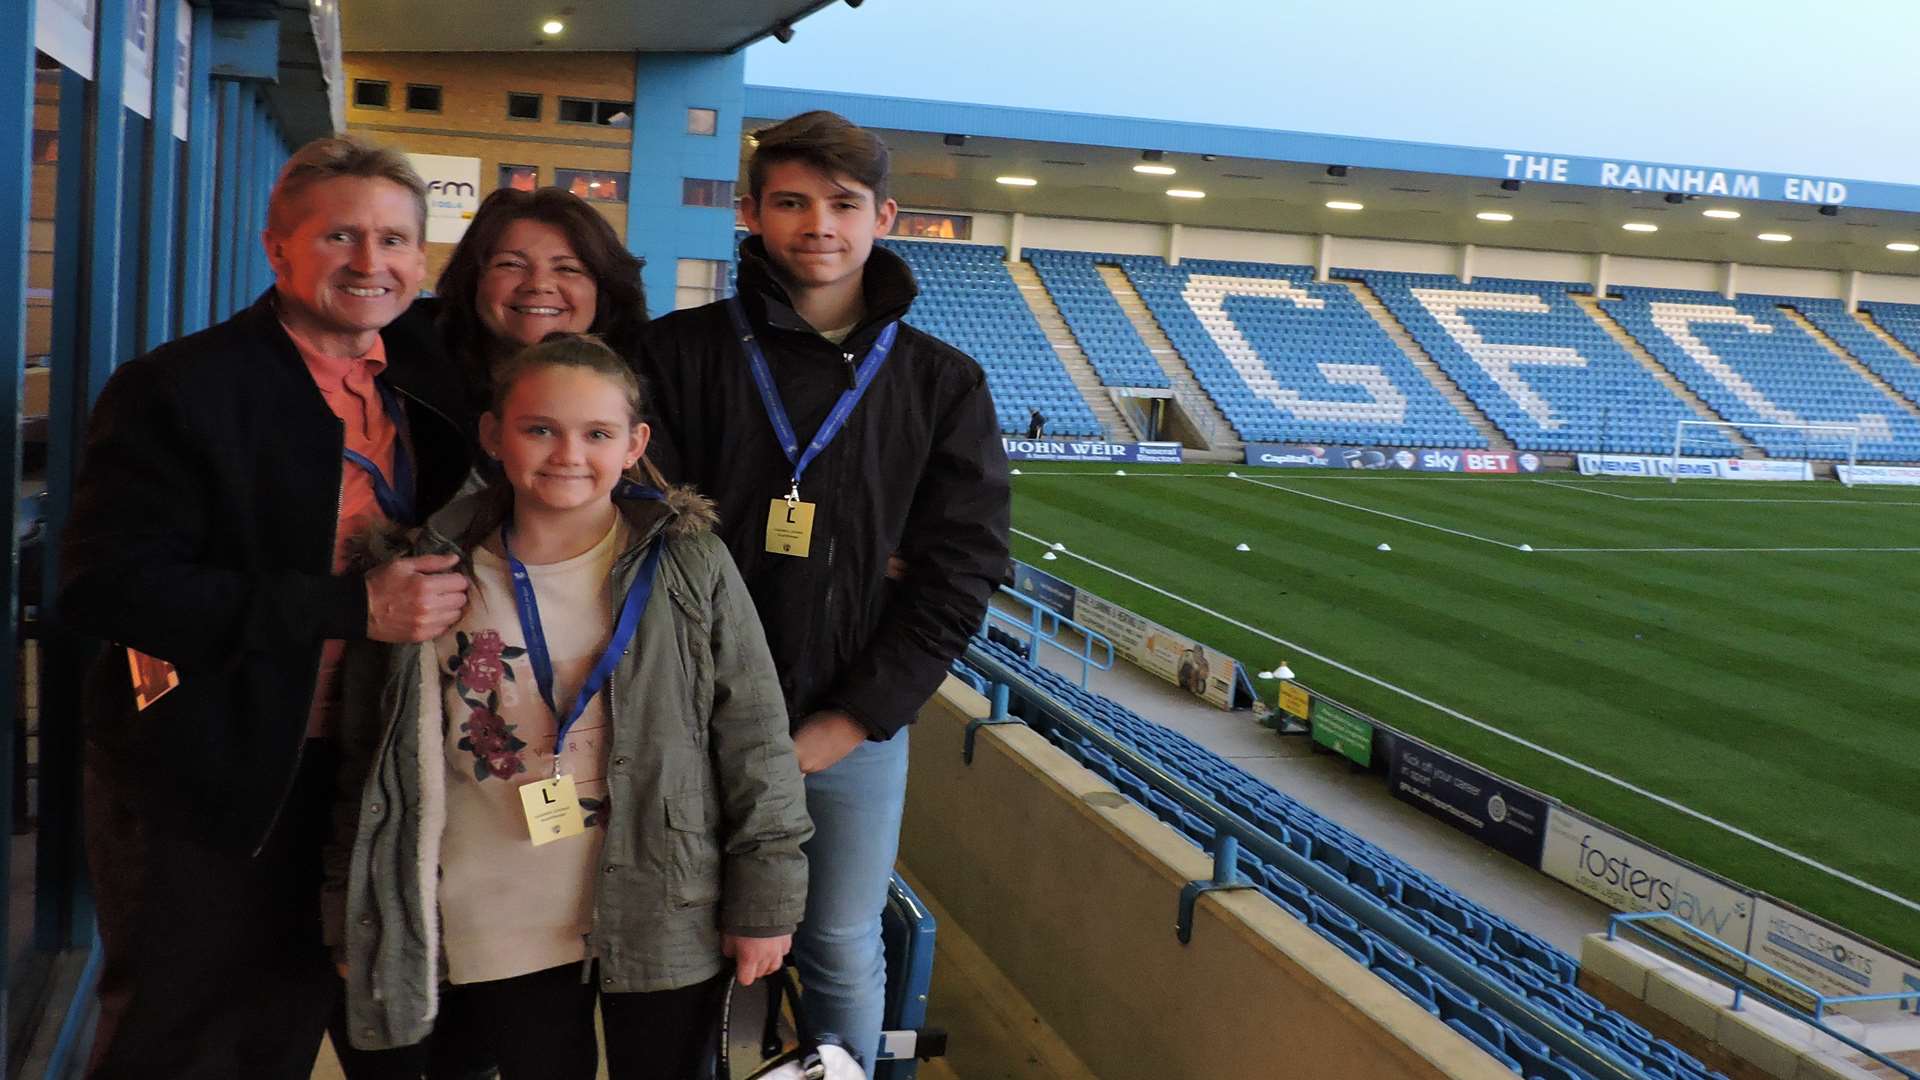 Charlie Nash was Gillingham's 12th man with with dad Mark, sister Maddie, mum Tracy